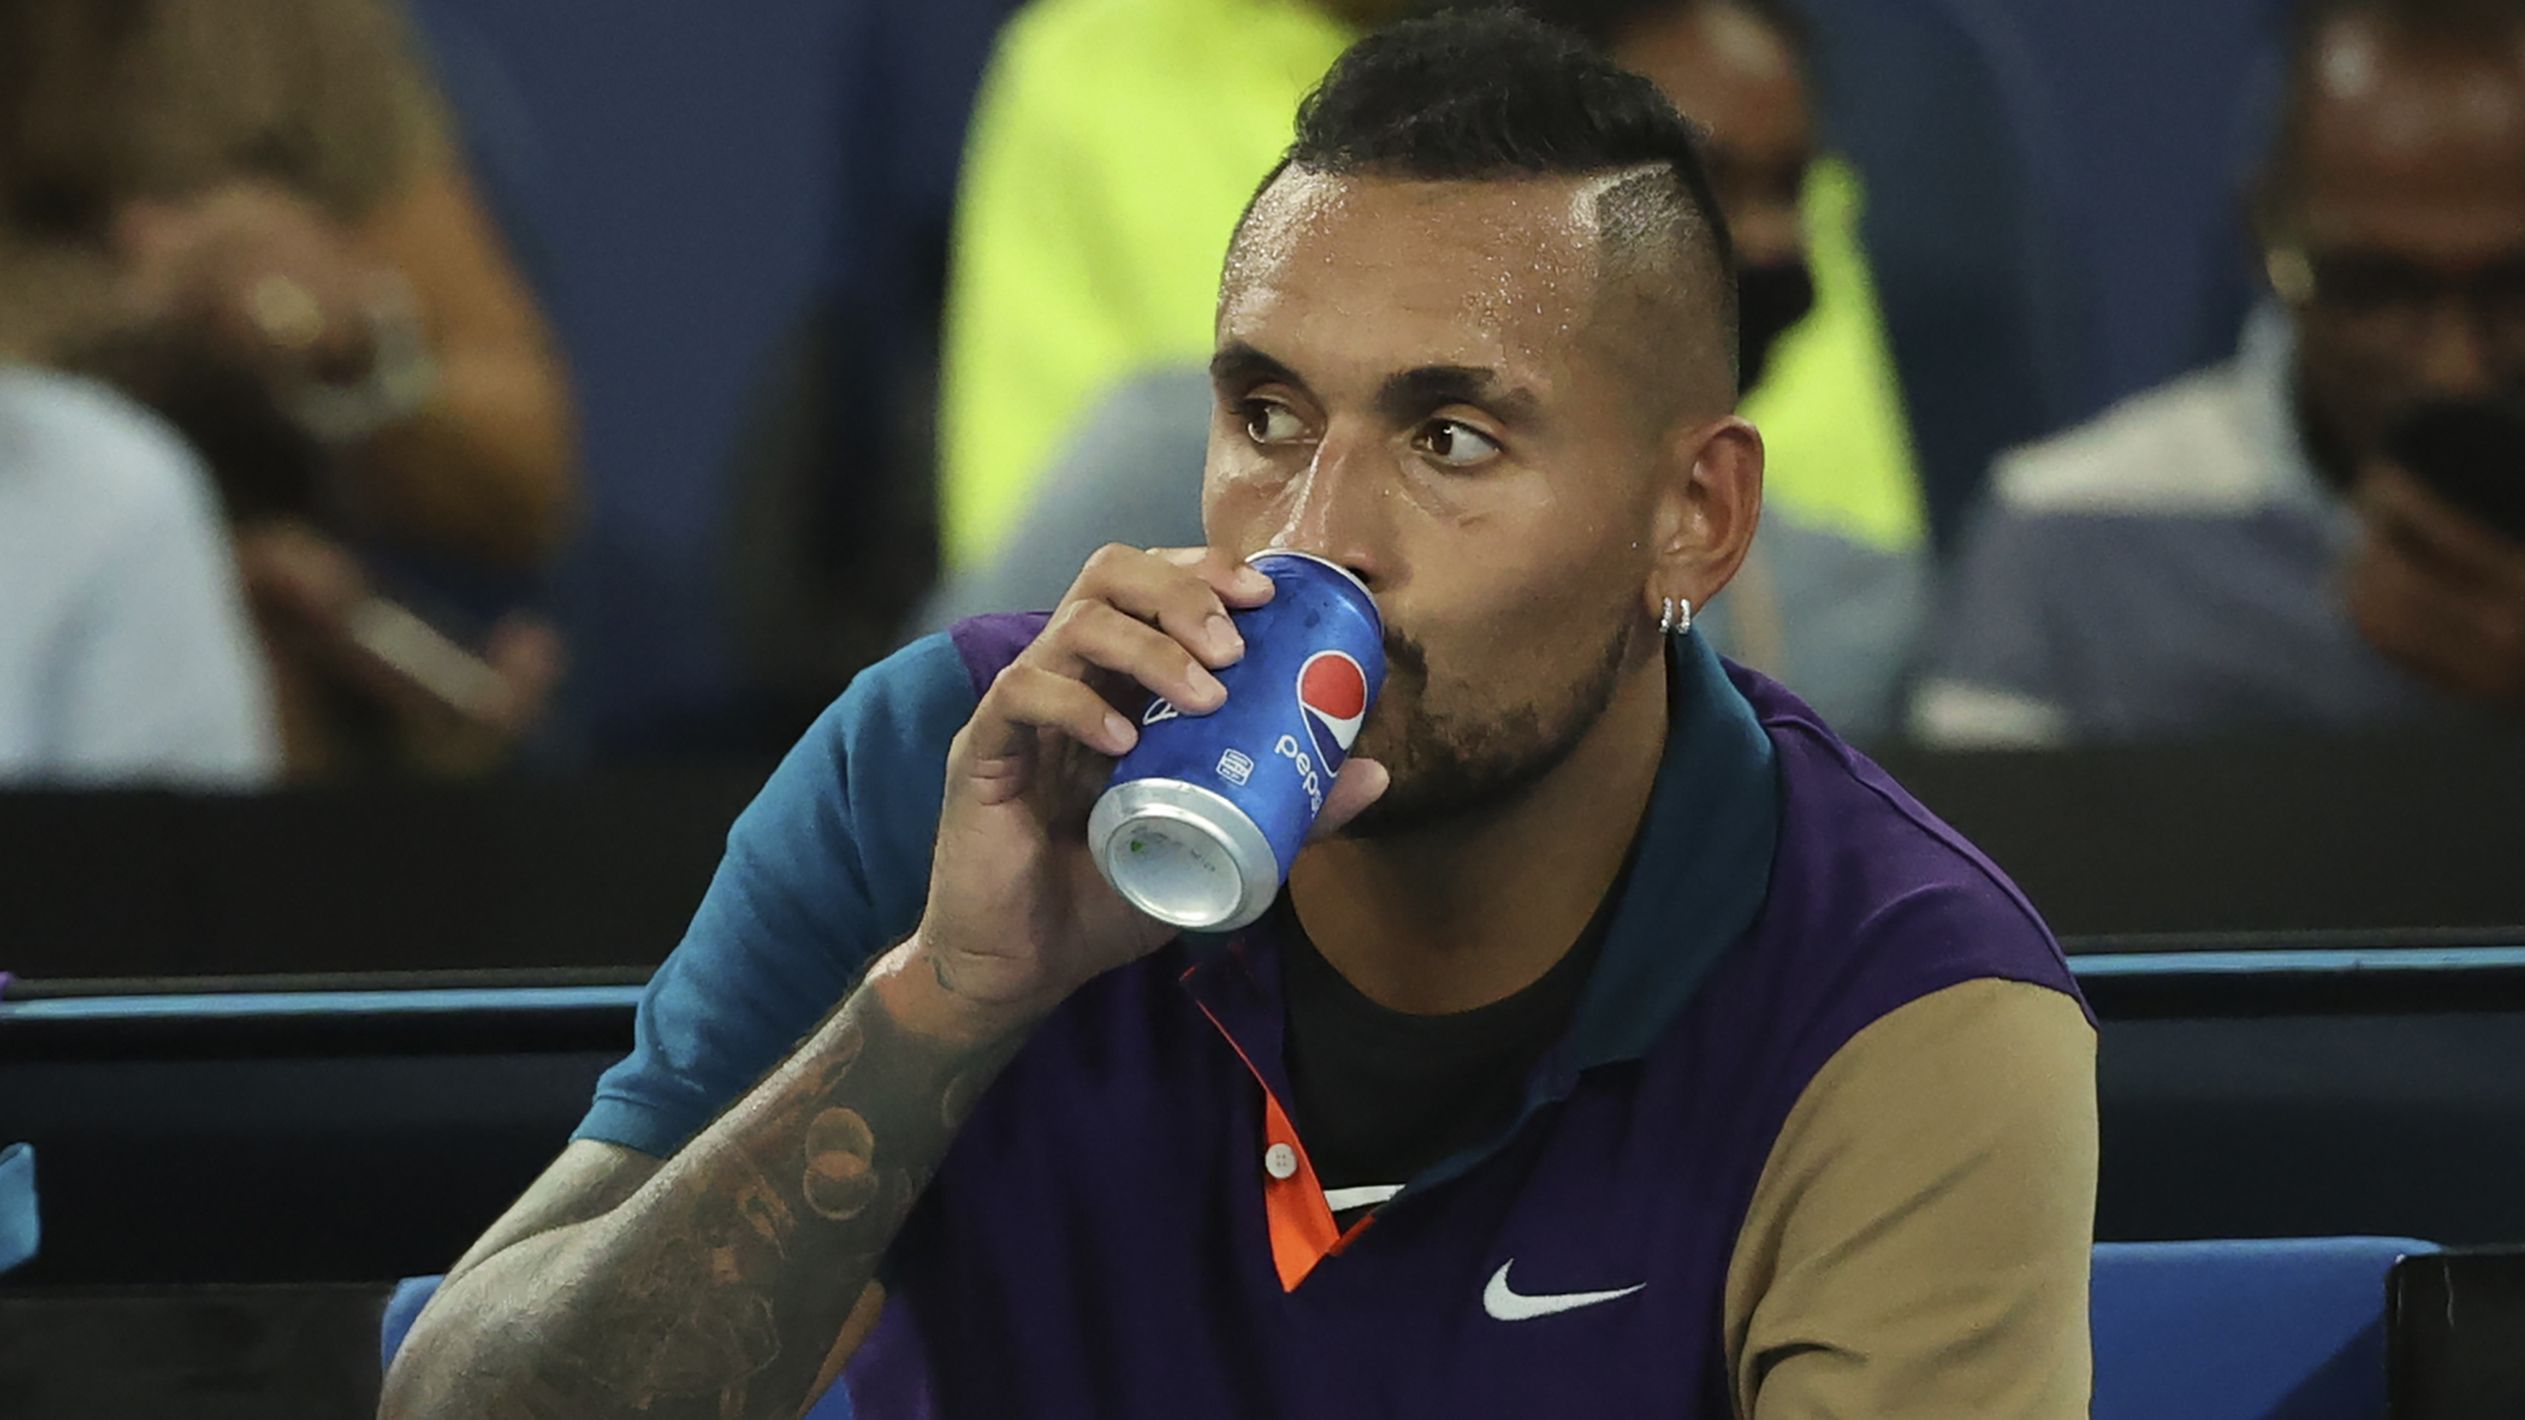 Nick Kyrgios was drinking Pepsi during his epic Australian Open loss to Dominic Thiem